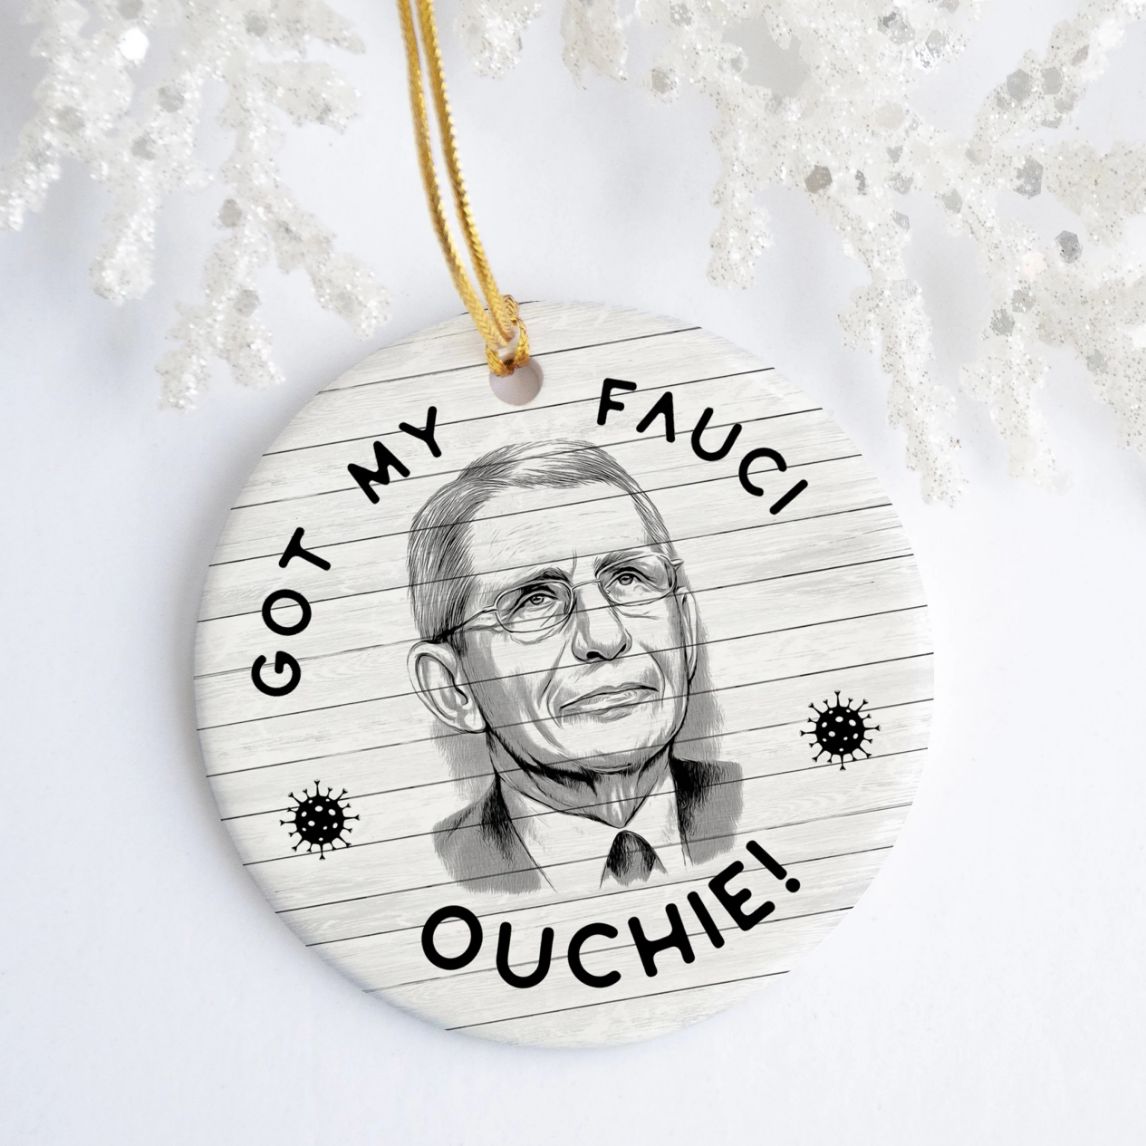 Funny Got My Fauci Ouchie Team Dr Fauci Pro Ative Christmas Ceramic Ornament